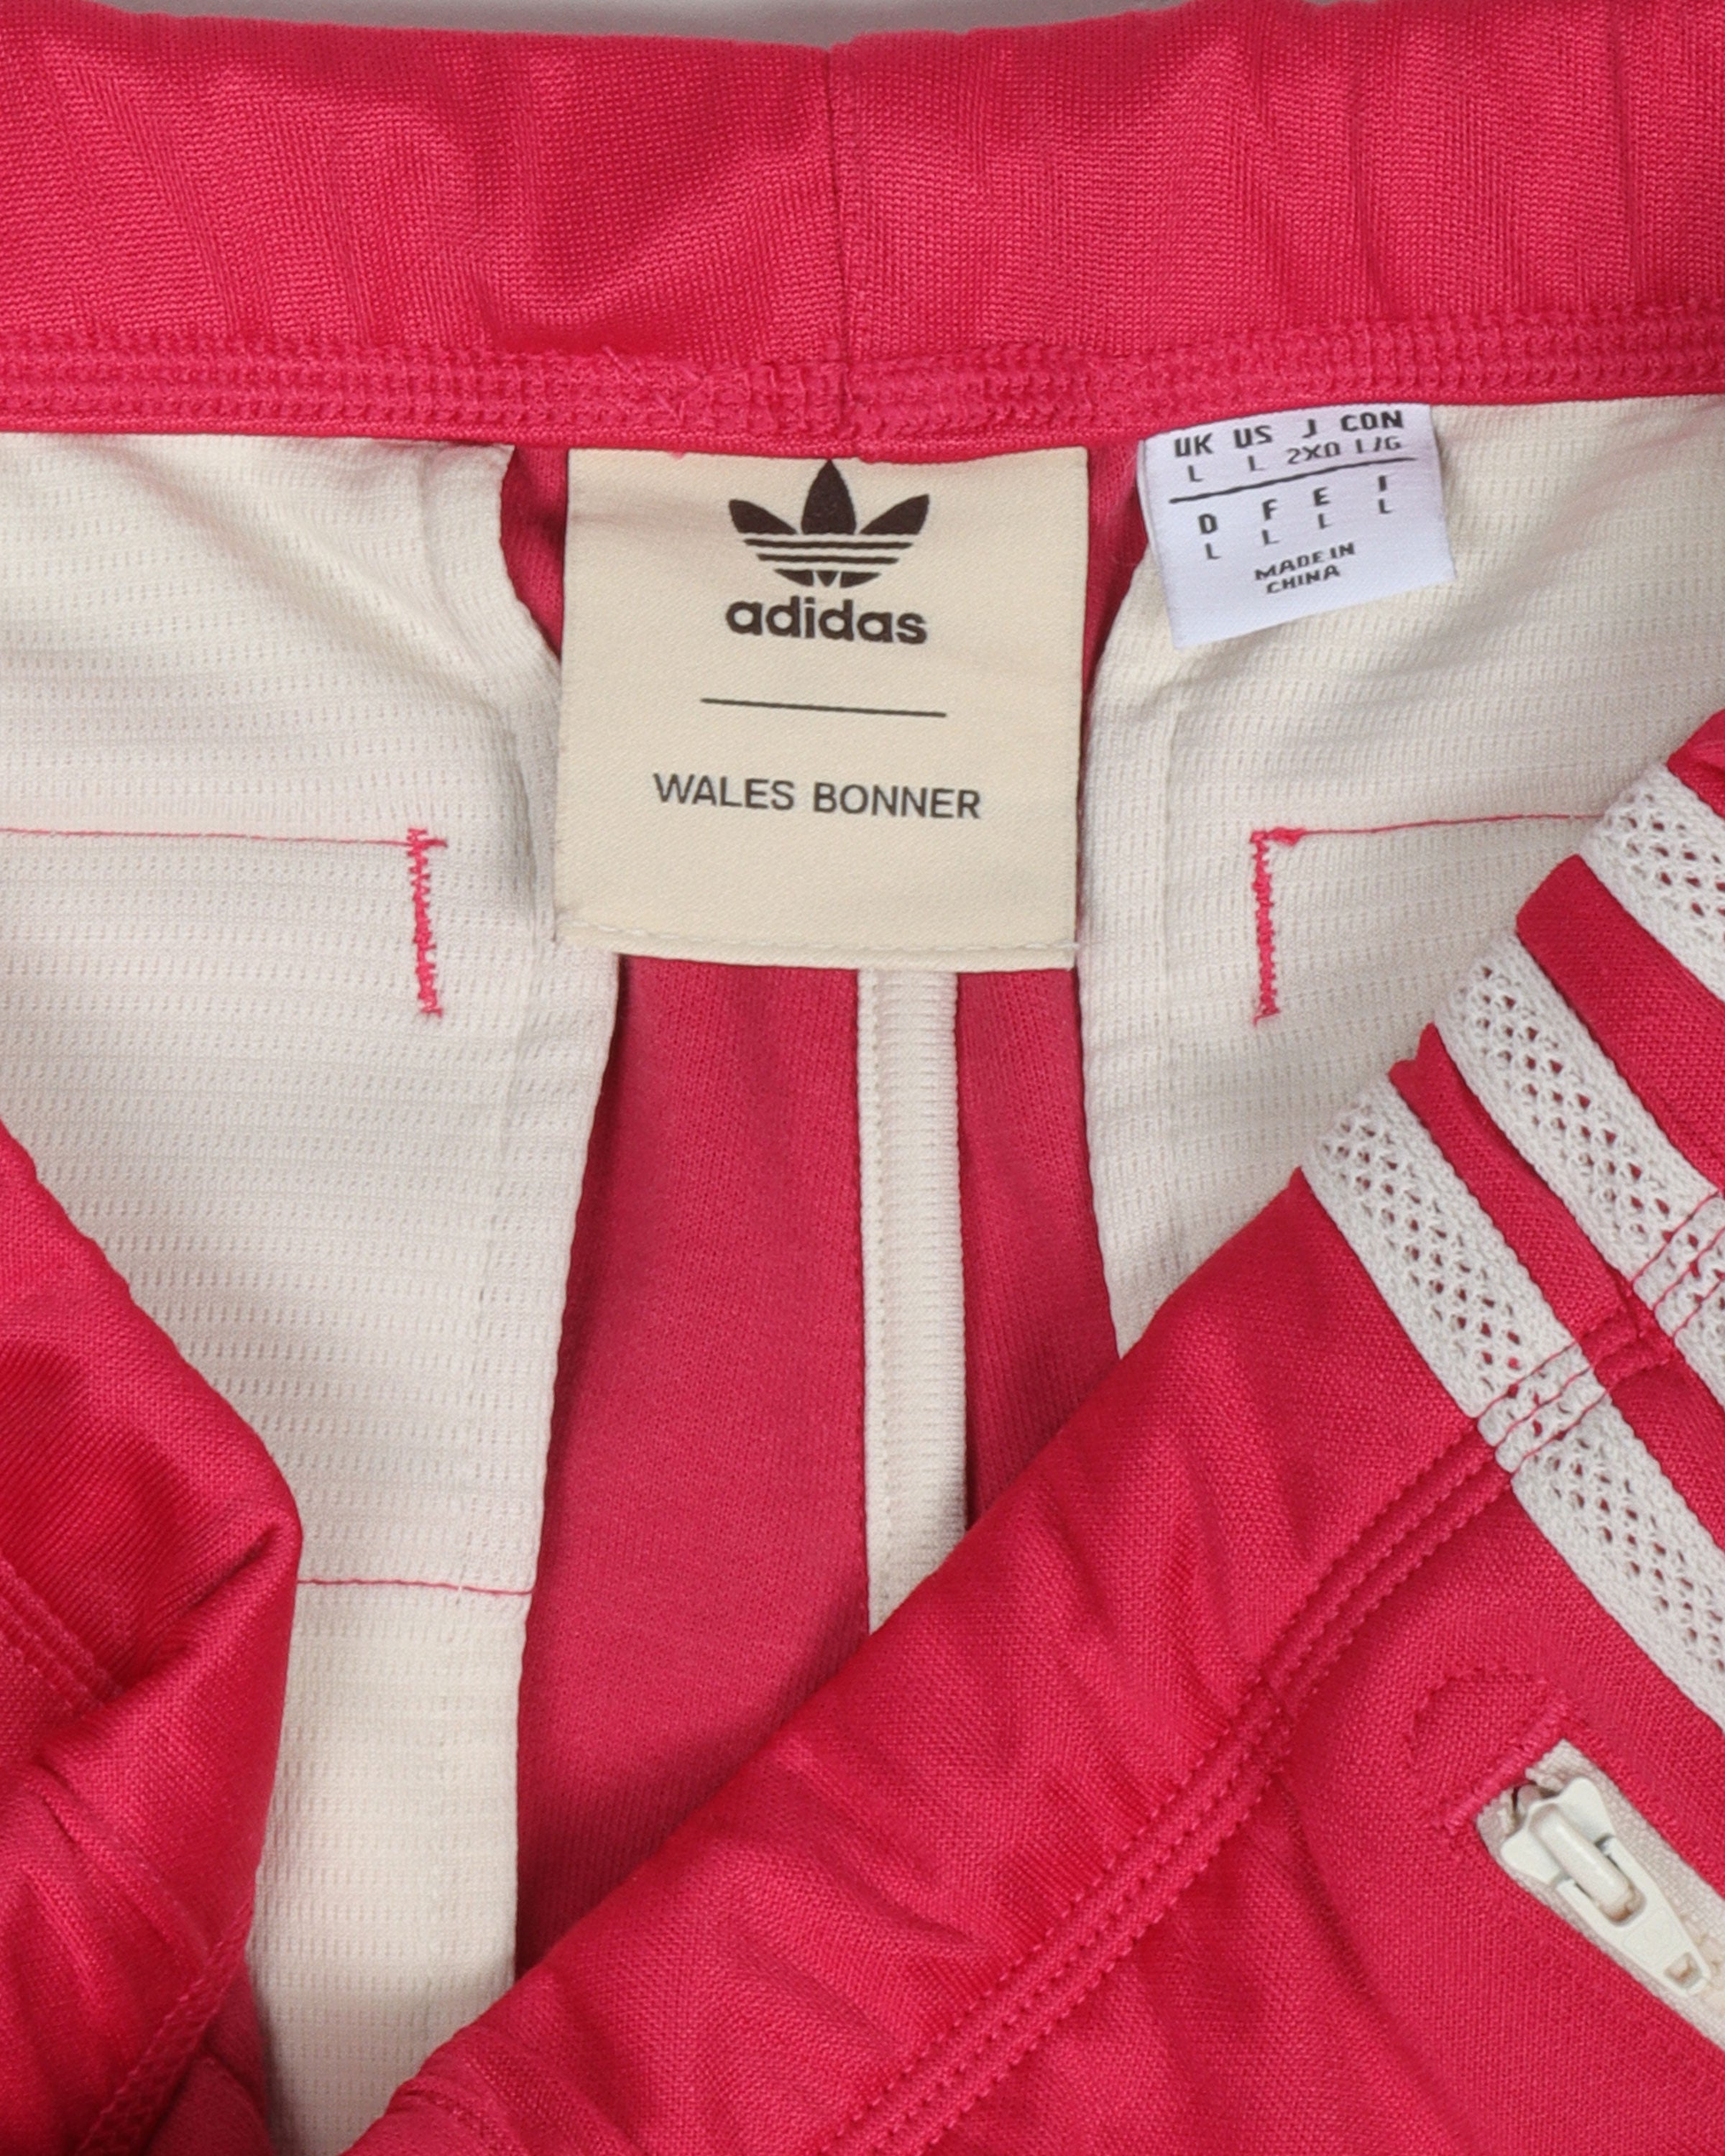 Adidas x Wales Bonner Track Pant » Buy online now!